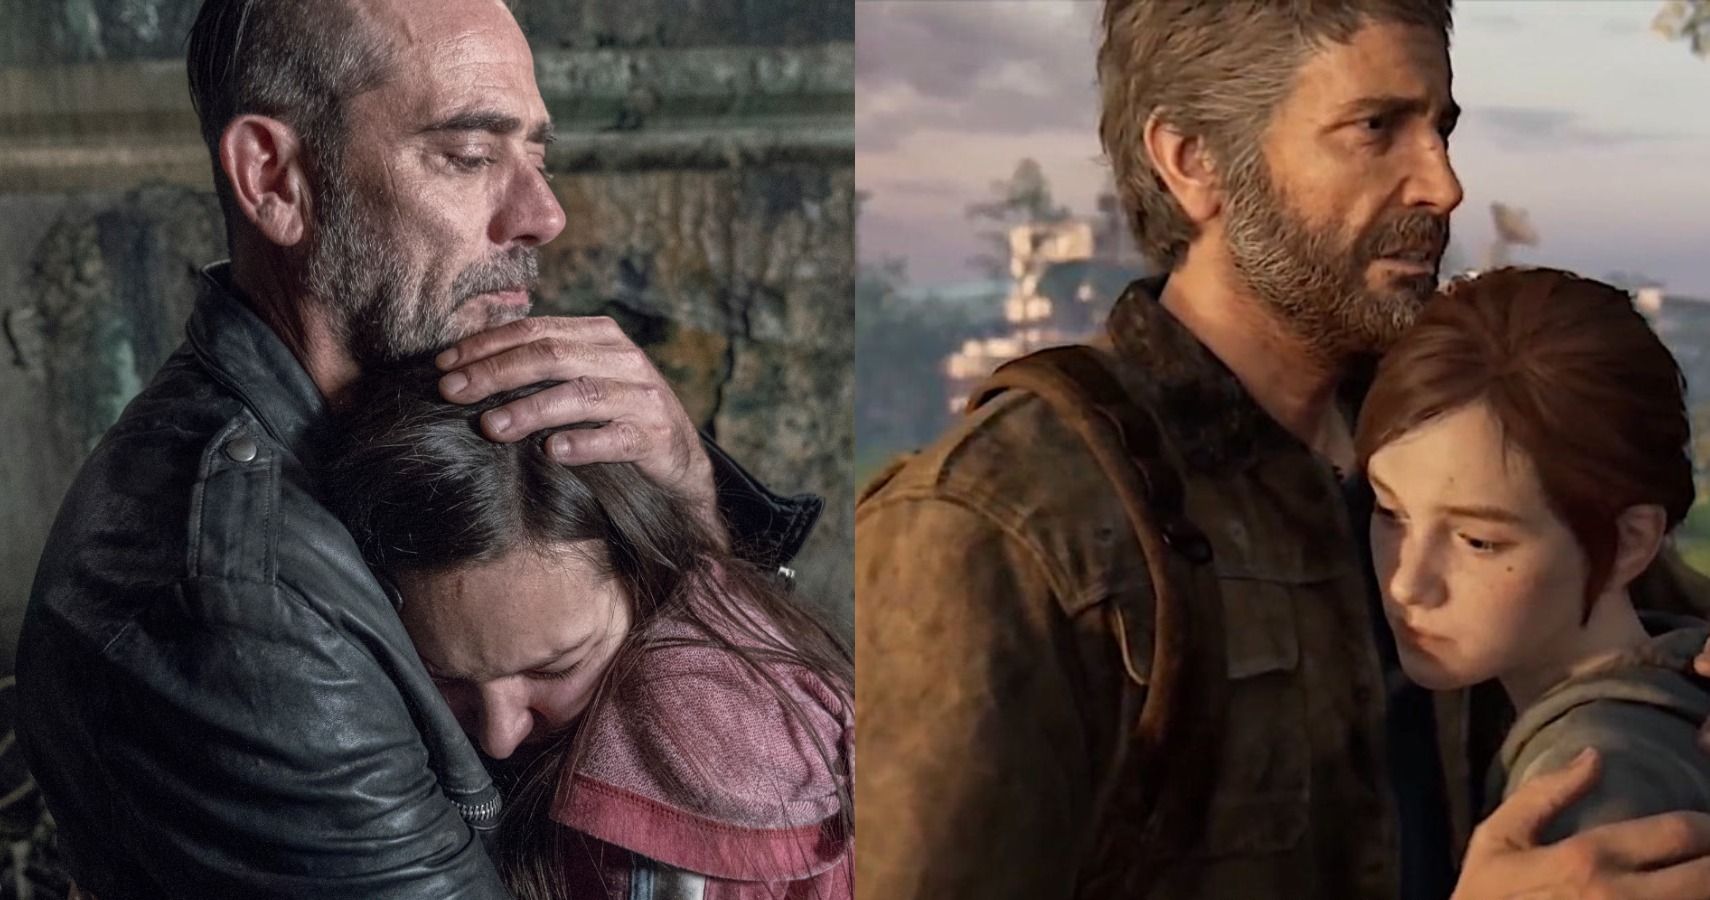 HBO Last of Us casts Tommy's voice actor in a different role